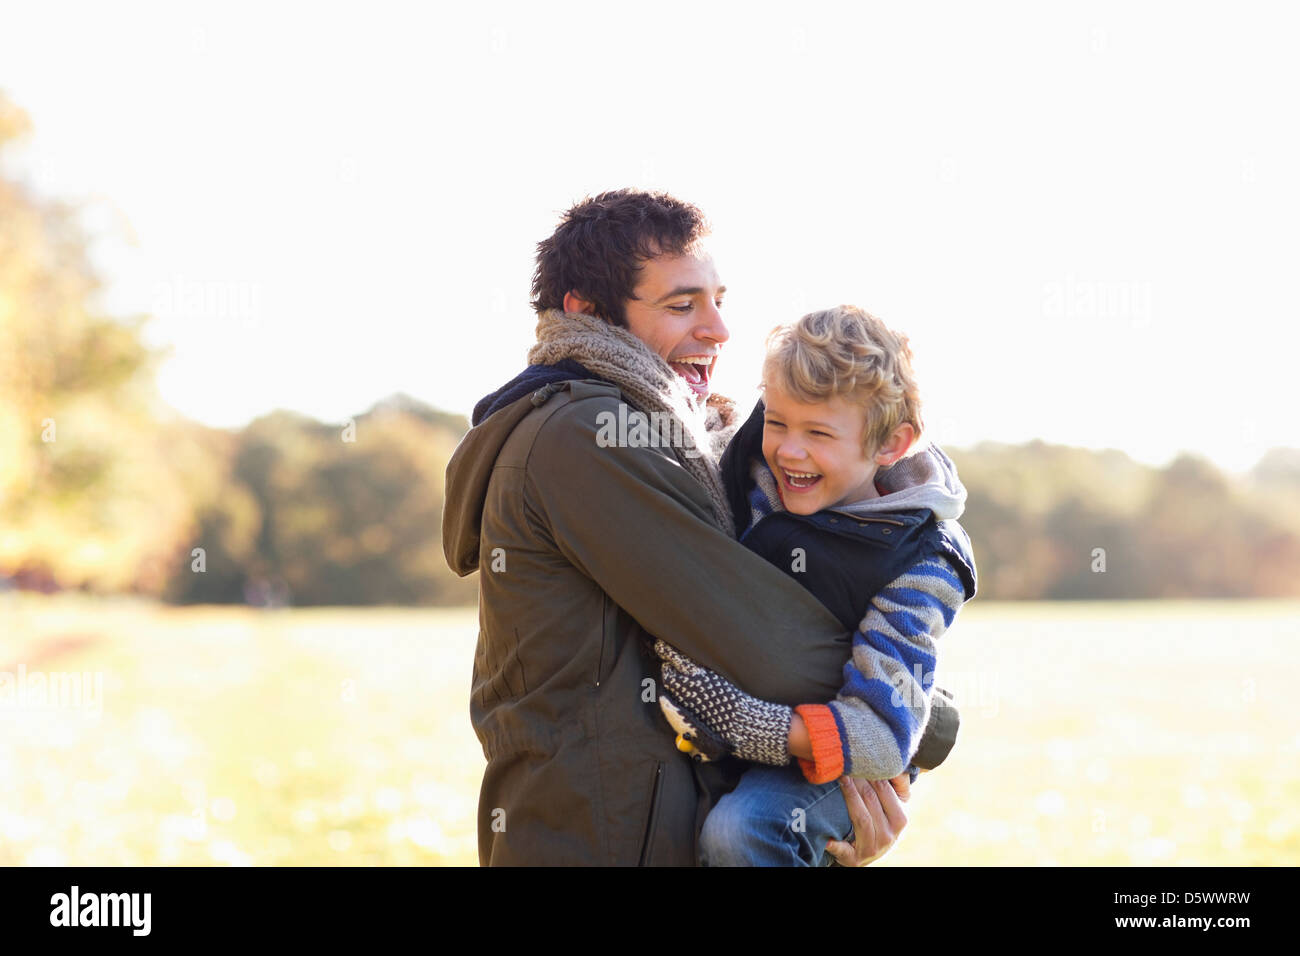 Father and son playing outdoors Stock Photo